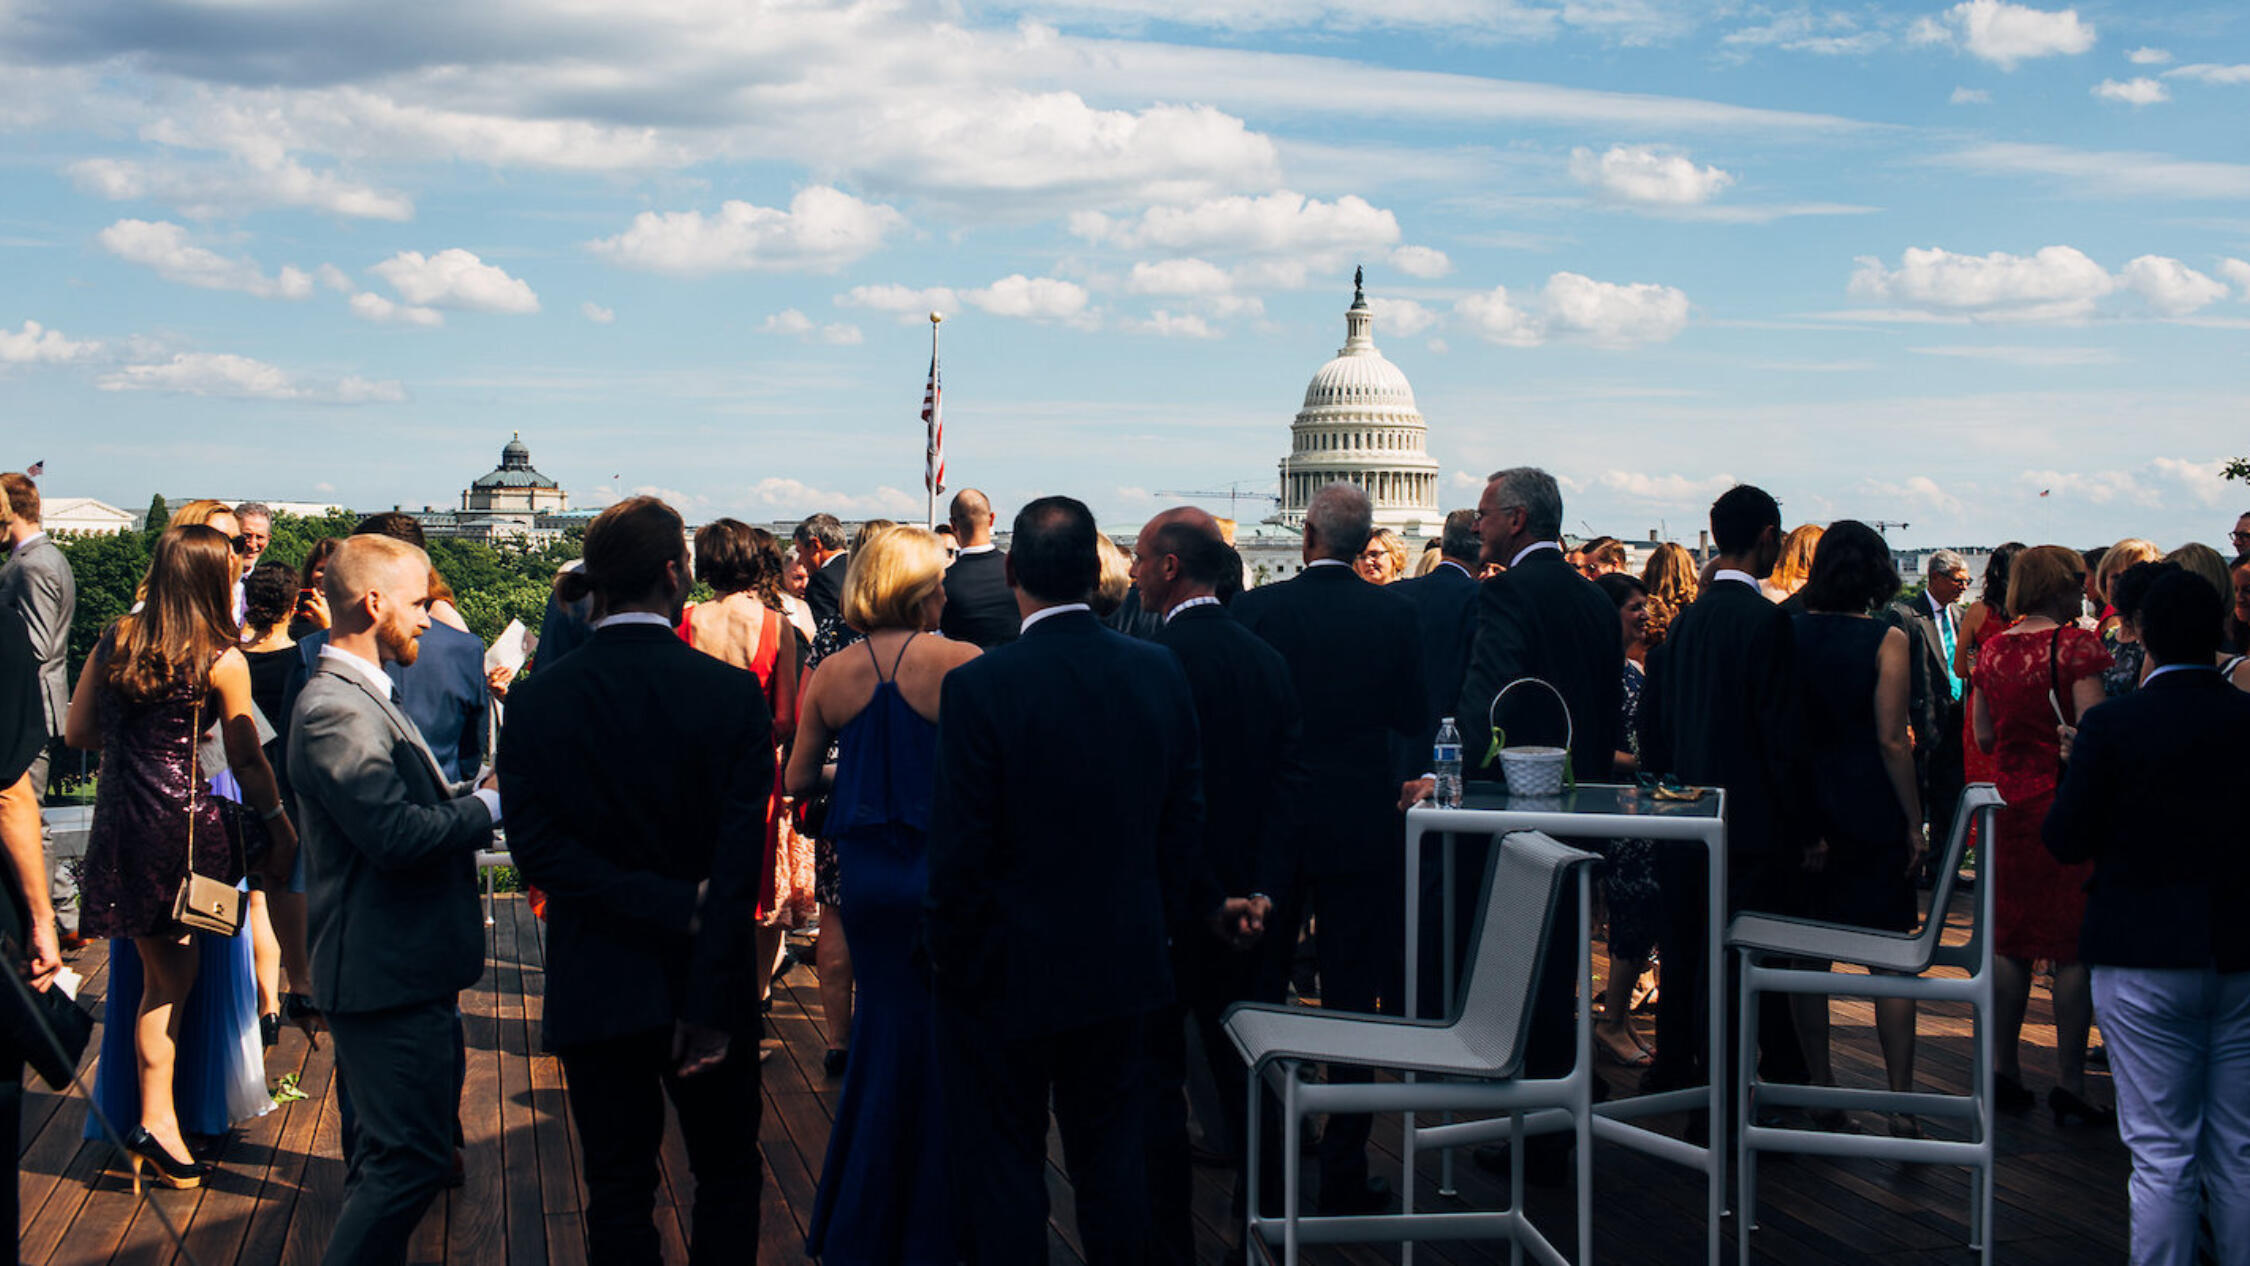 The U.S. Capitol can be seen from a rooftop event at America's Square